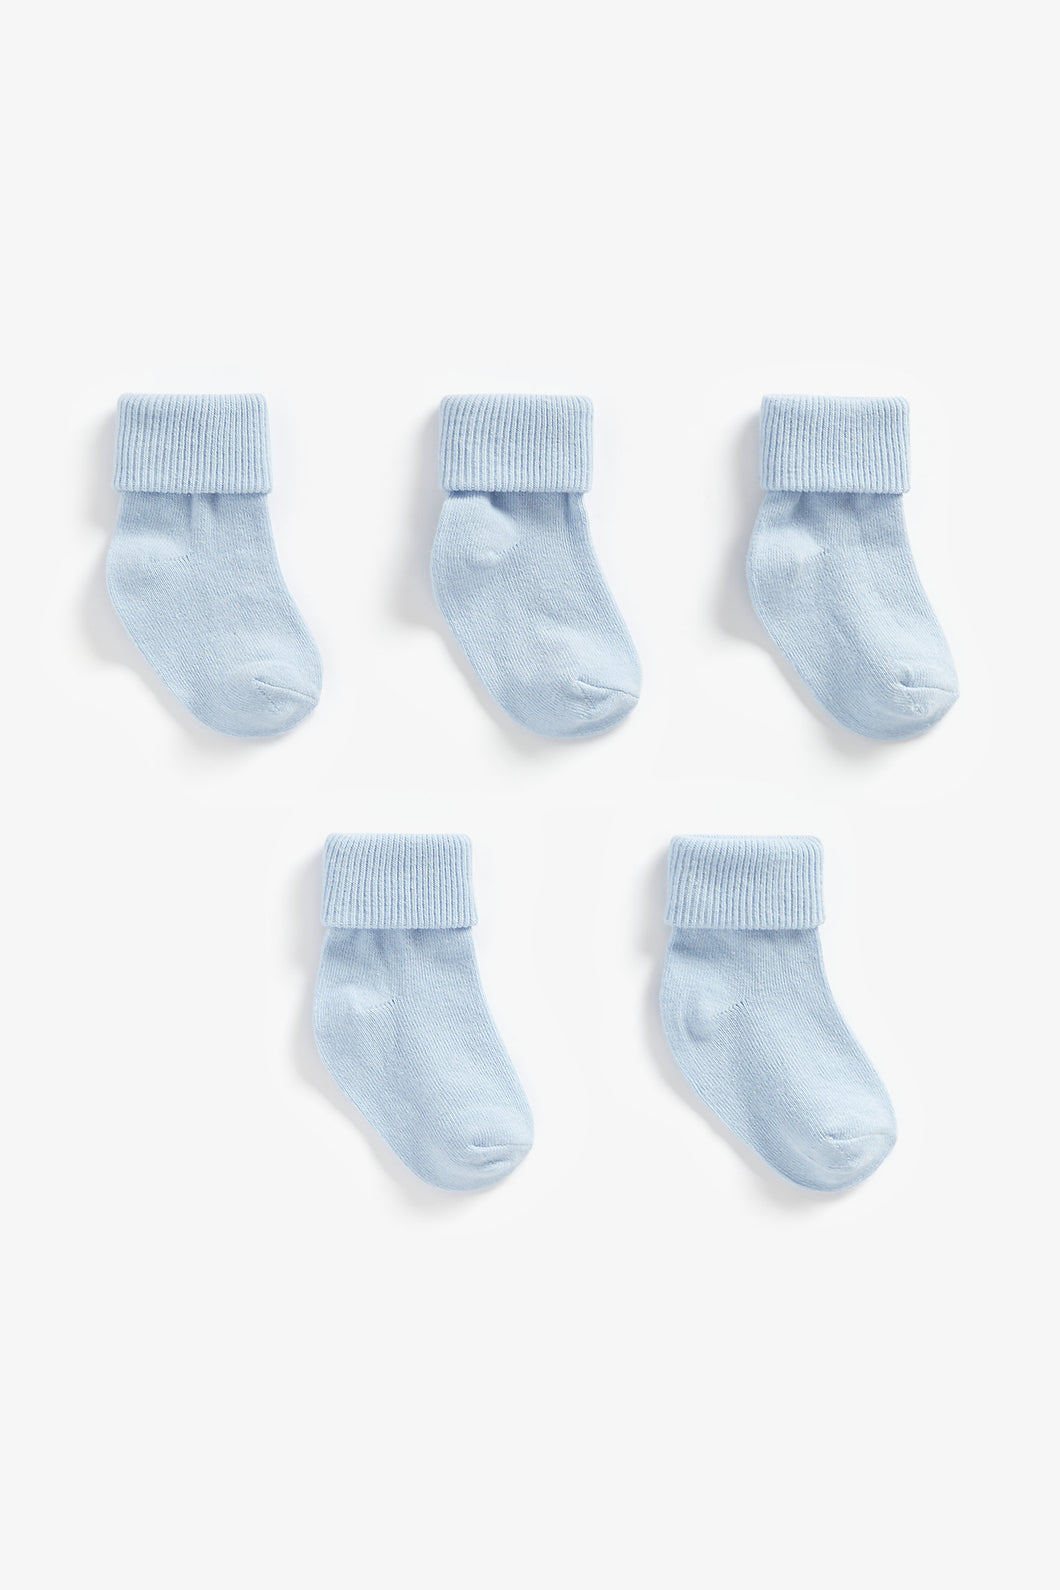 Mothercare Blue Turn-Over-Top Socks - 5 Pack